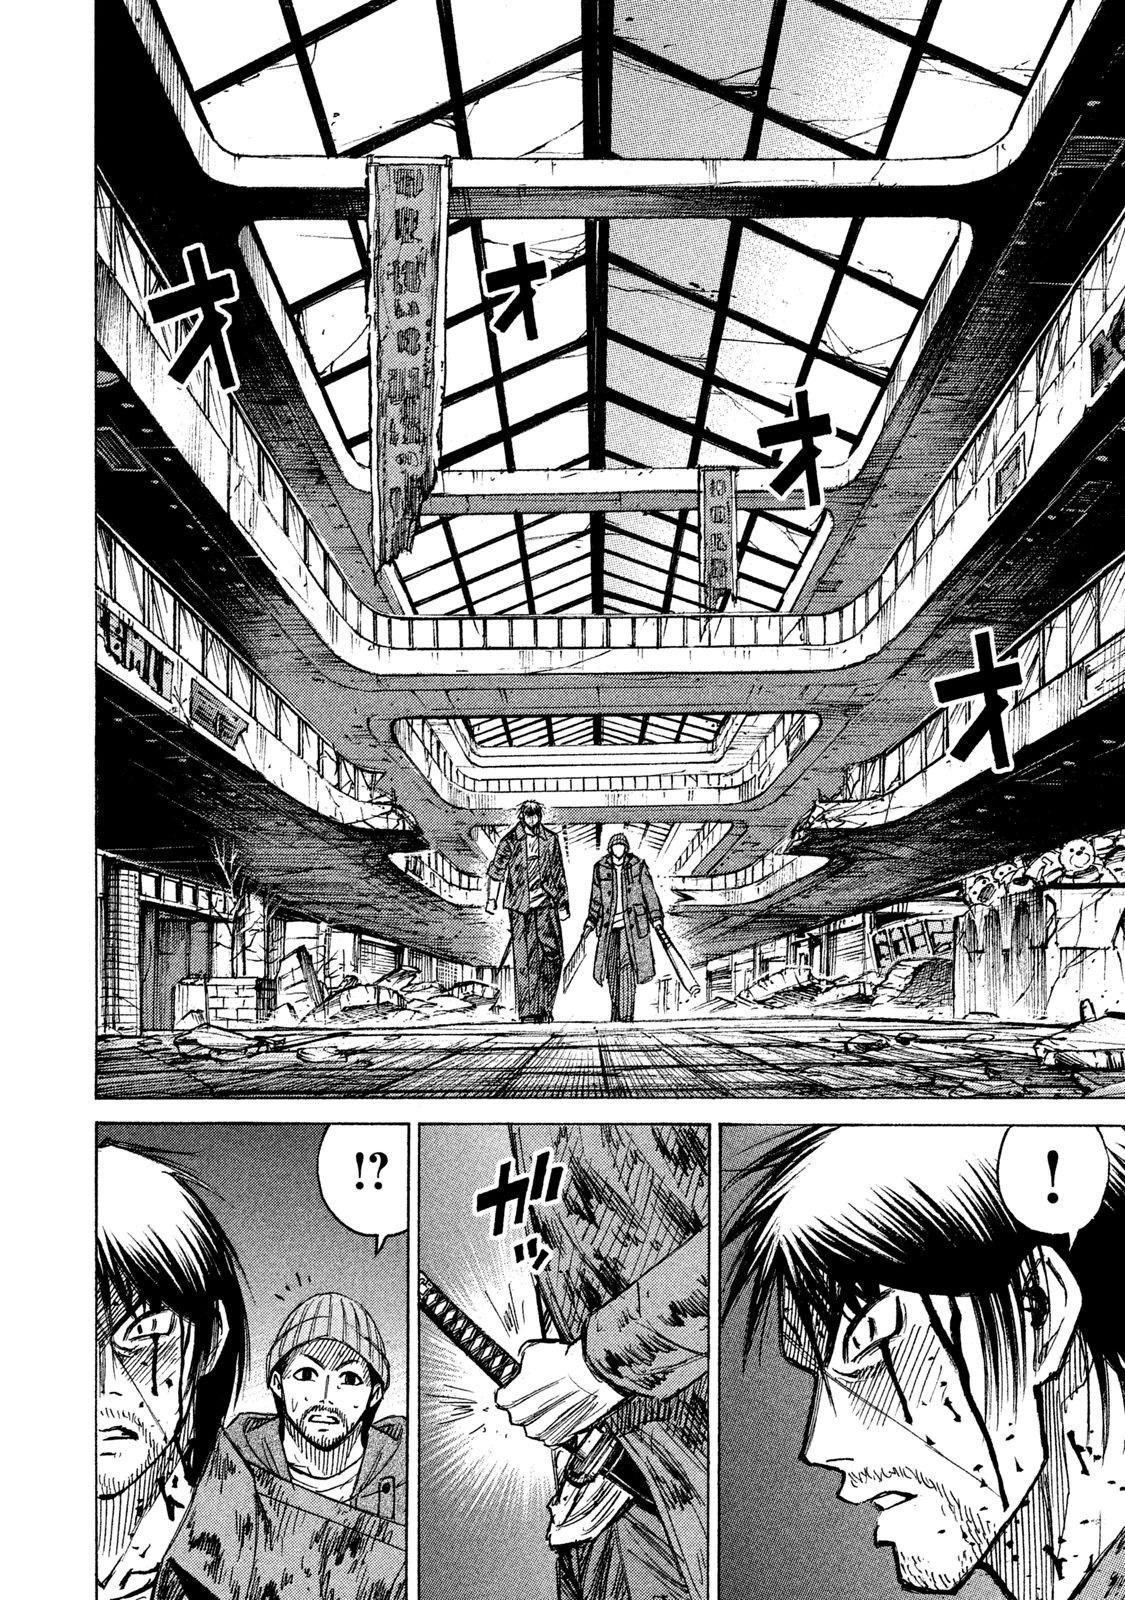 Higanjima - 48 Days Later Vol.2 Chapter 11: The Third Floor - Picture 2